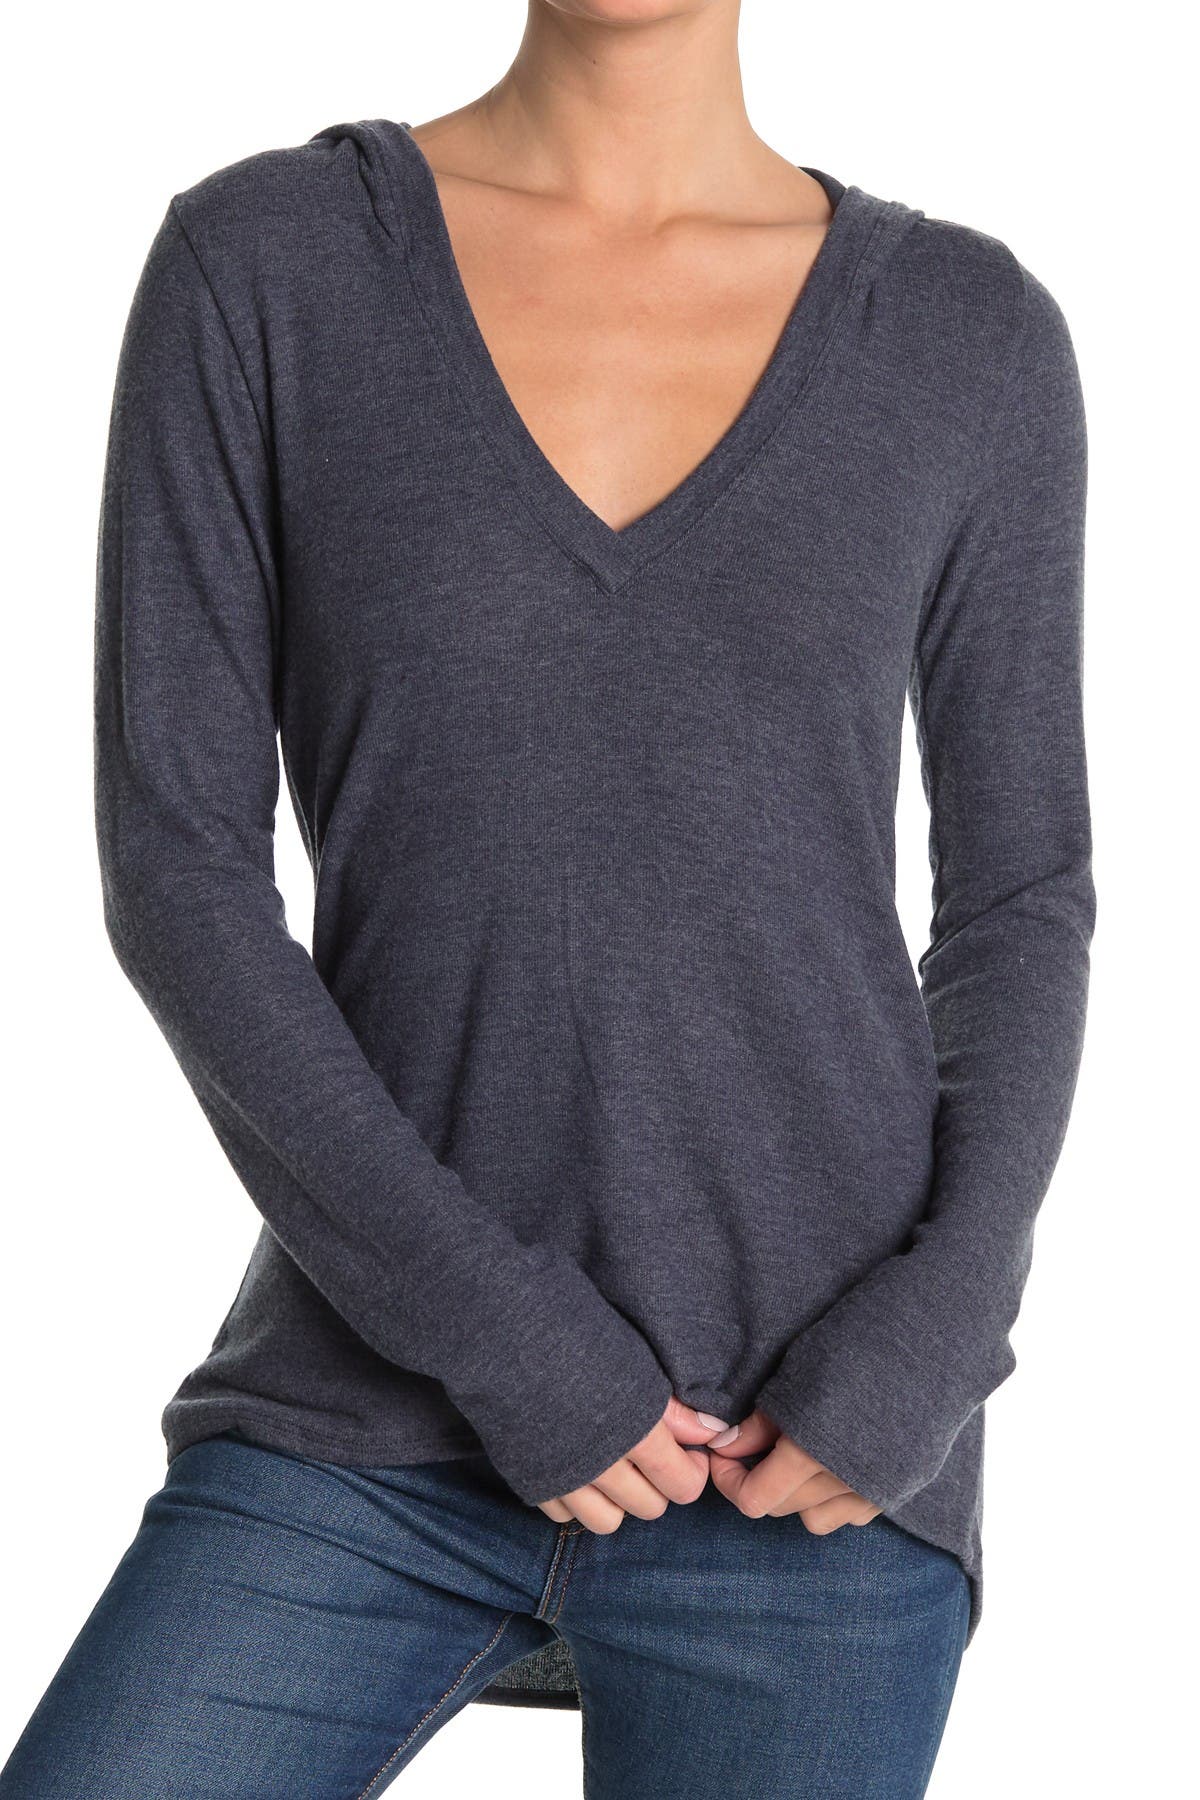 Go Couture Deep V-neck Hooded Top In Navy3